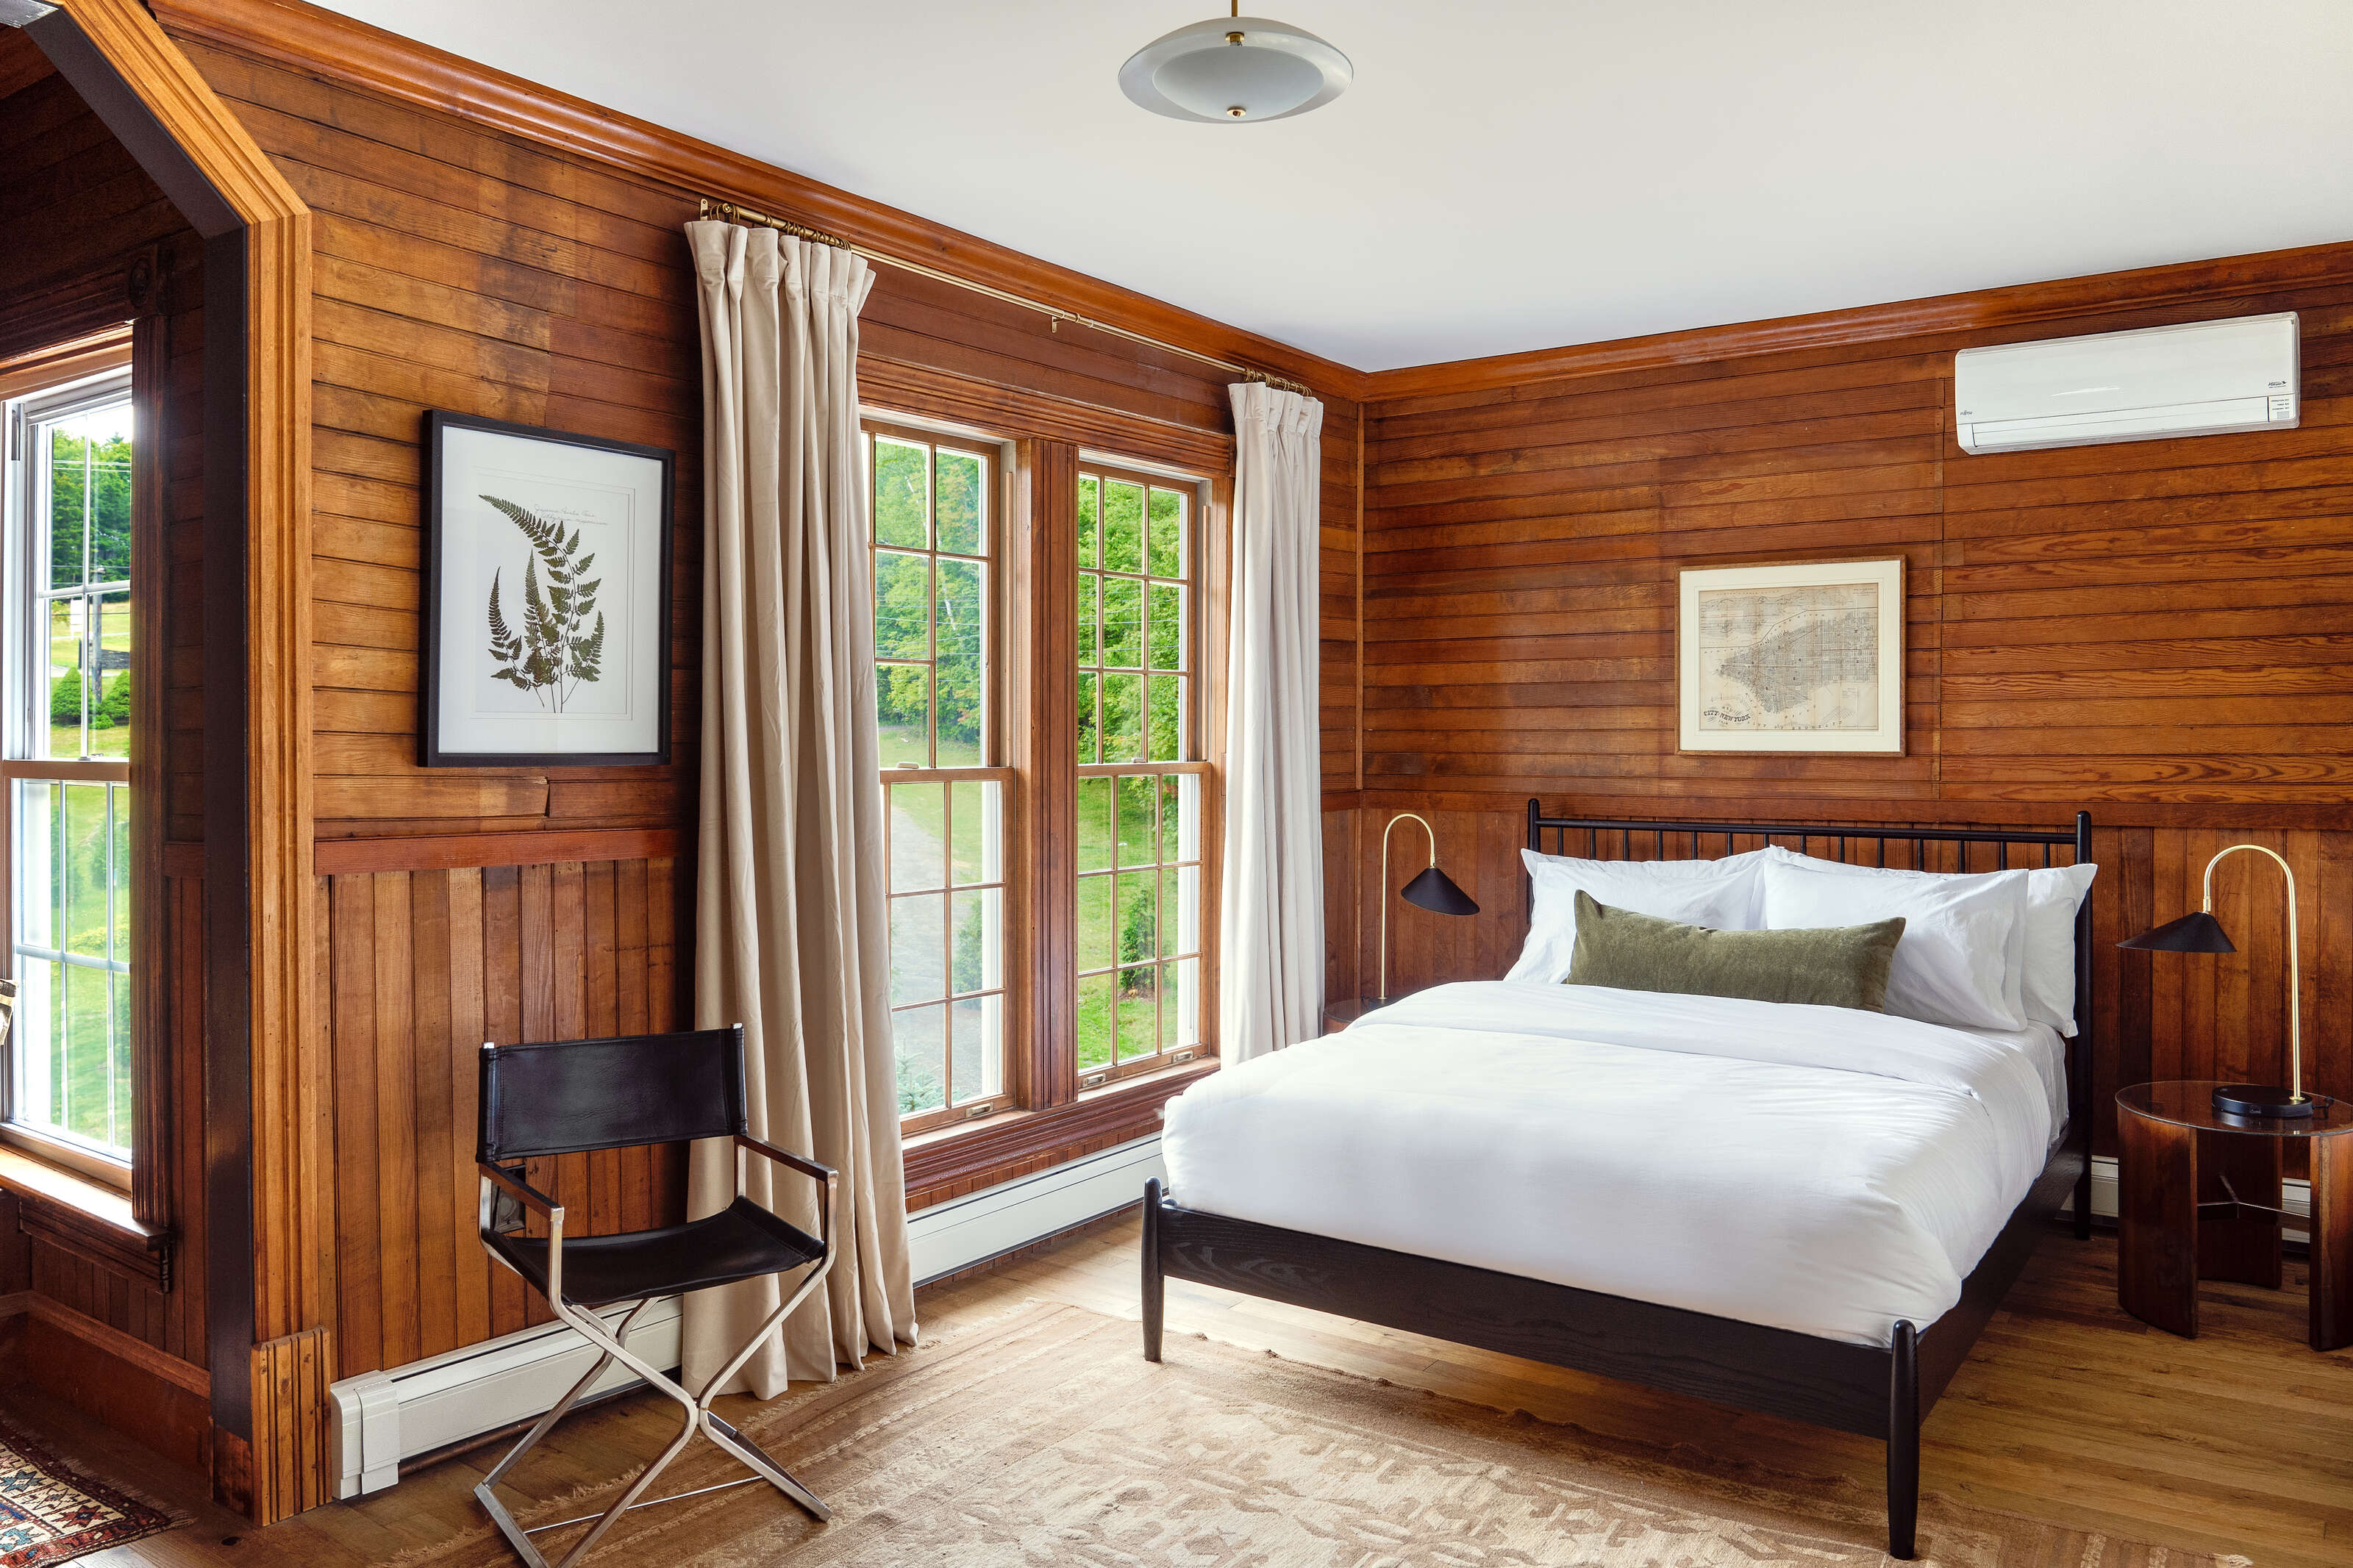 Inside a bedroom at the new Hotel Lilien, a Catskills boutique hotel